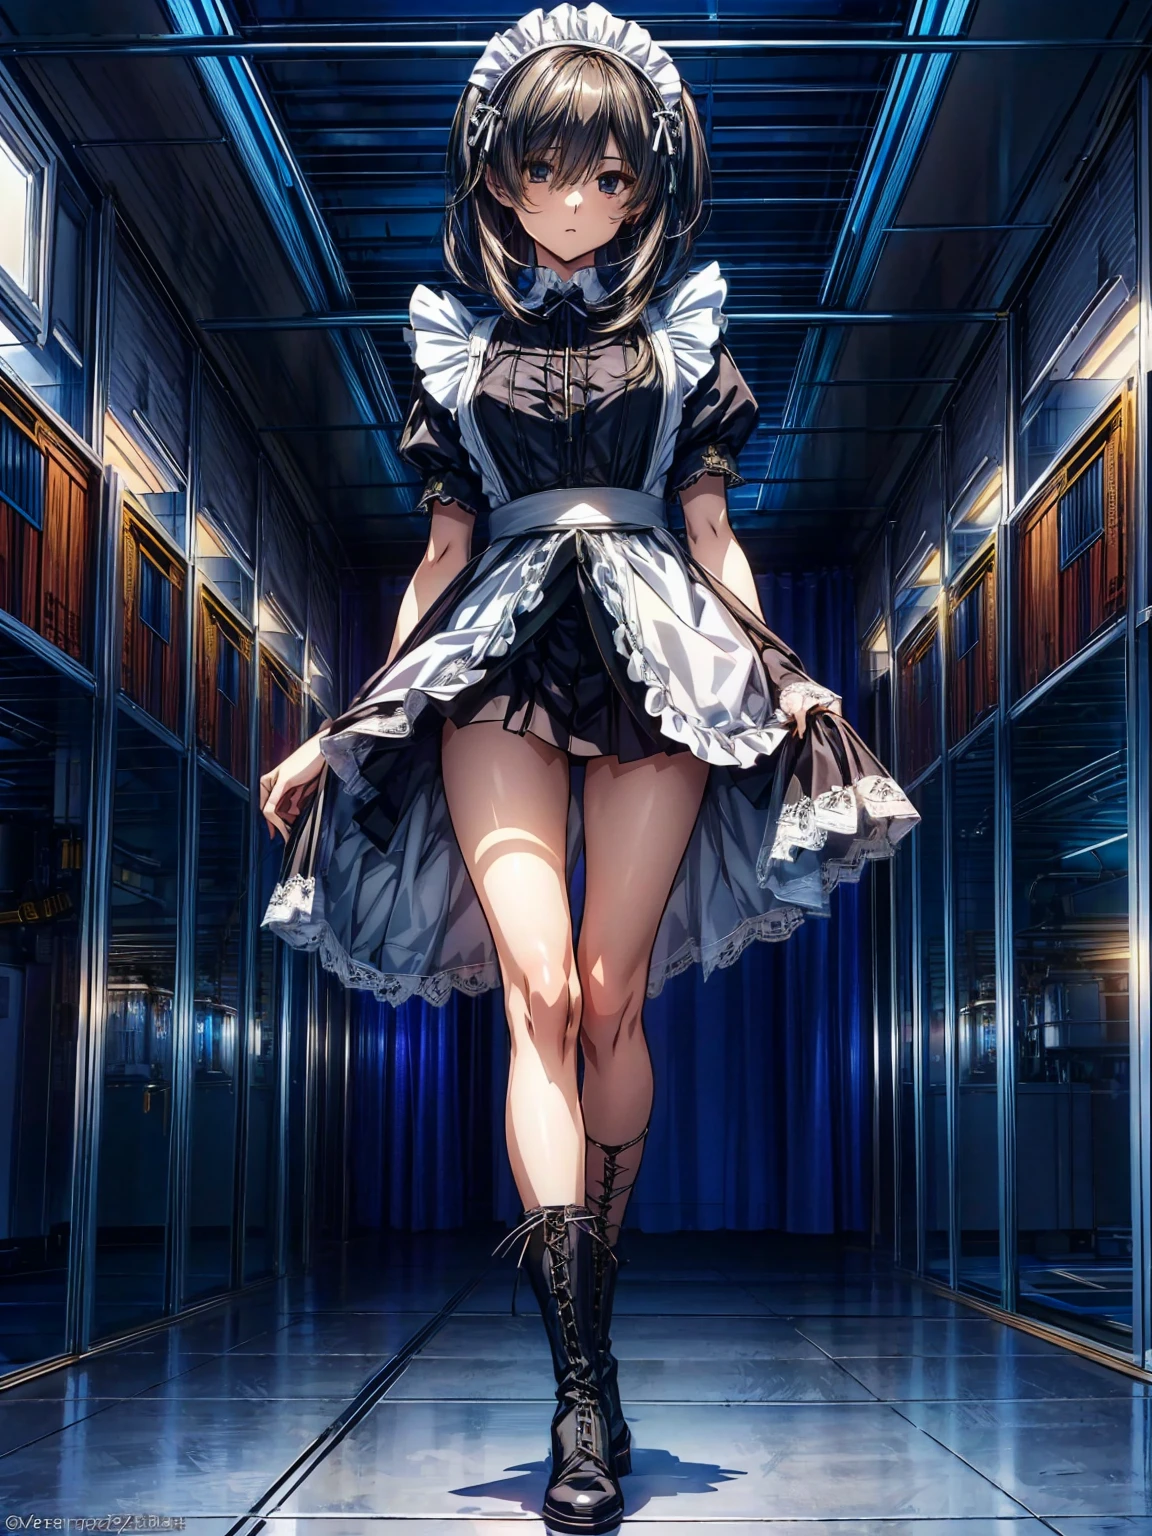 (Perfect Anatomy:1.2, Highest quality),(Maid leotard details:1.6),One Girl,alone,Long Hair:1.5, (Short sleeve, Thighs,Maid Cufflinks),,Hypno Lola, Hollow Eyes,(High heel lace-up boots:1.4), (Without skirt:3.0),Dark aura,Leotrad,,love for viewers,Look down,(at a research facility:1.8)